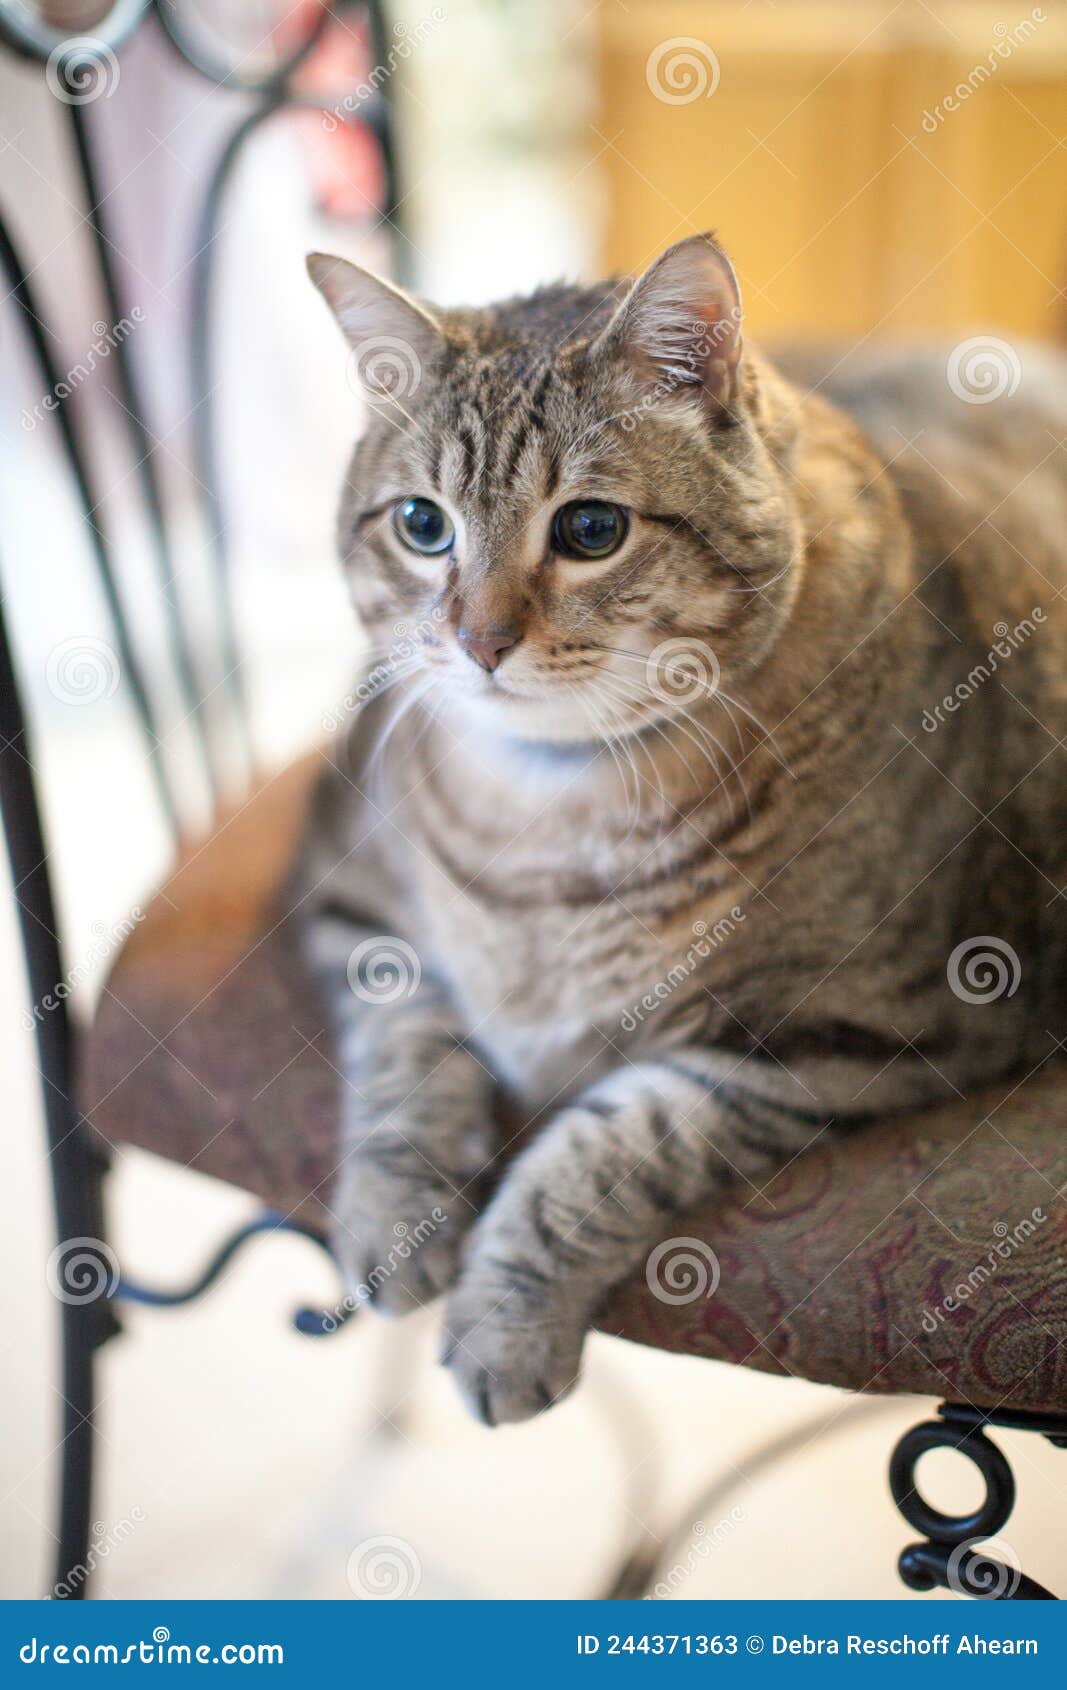 Fat kitty Stock Vector Images - Page 3 - Alamy